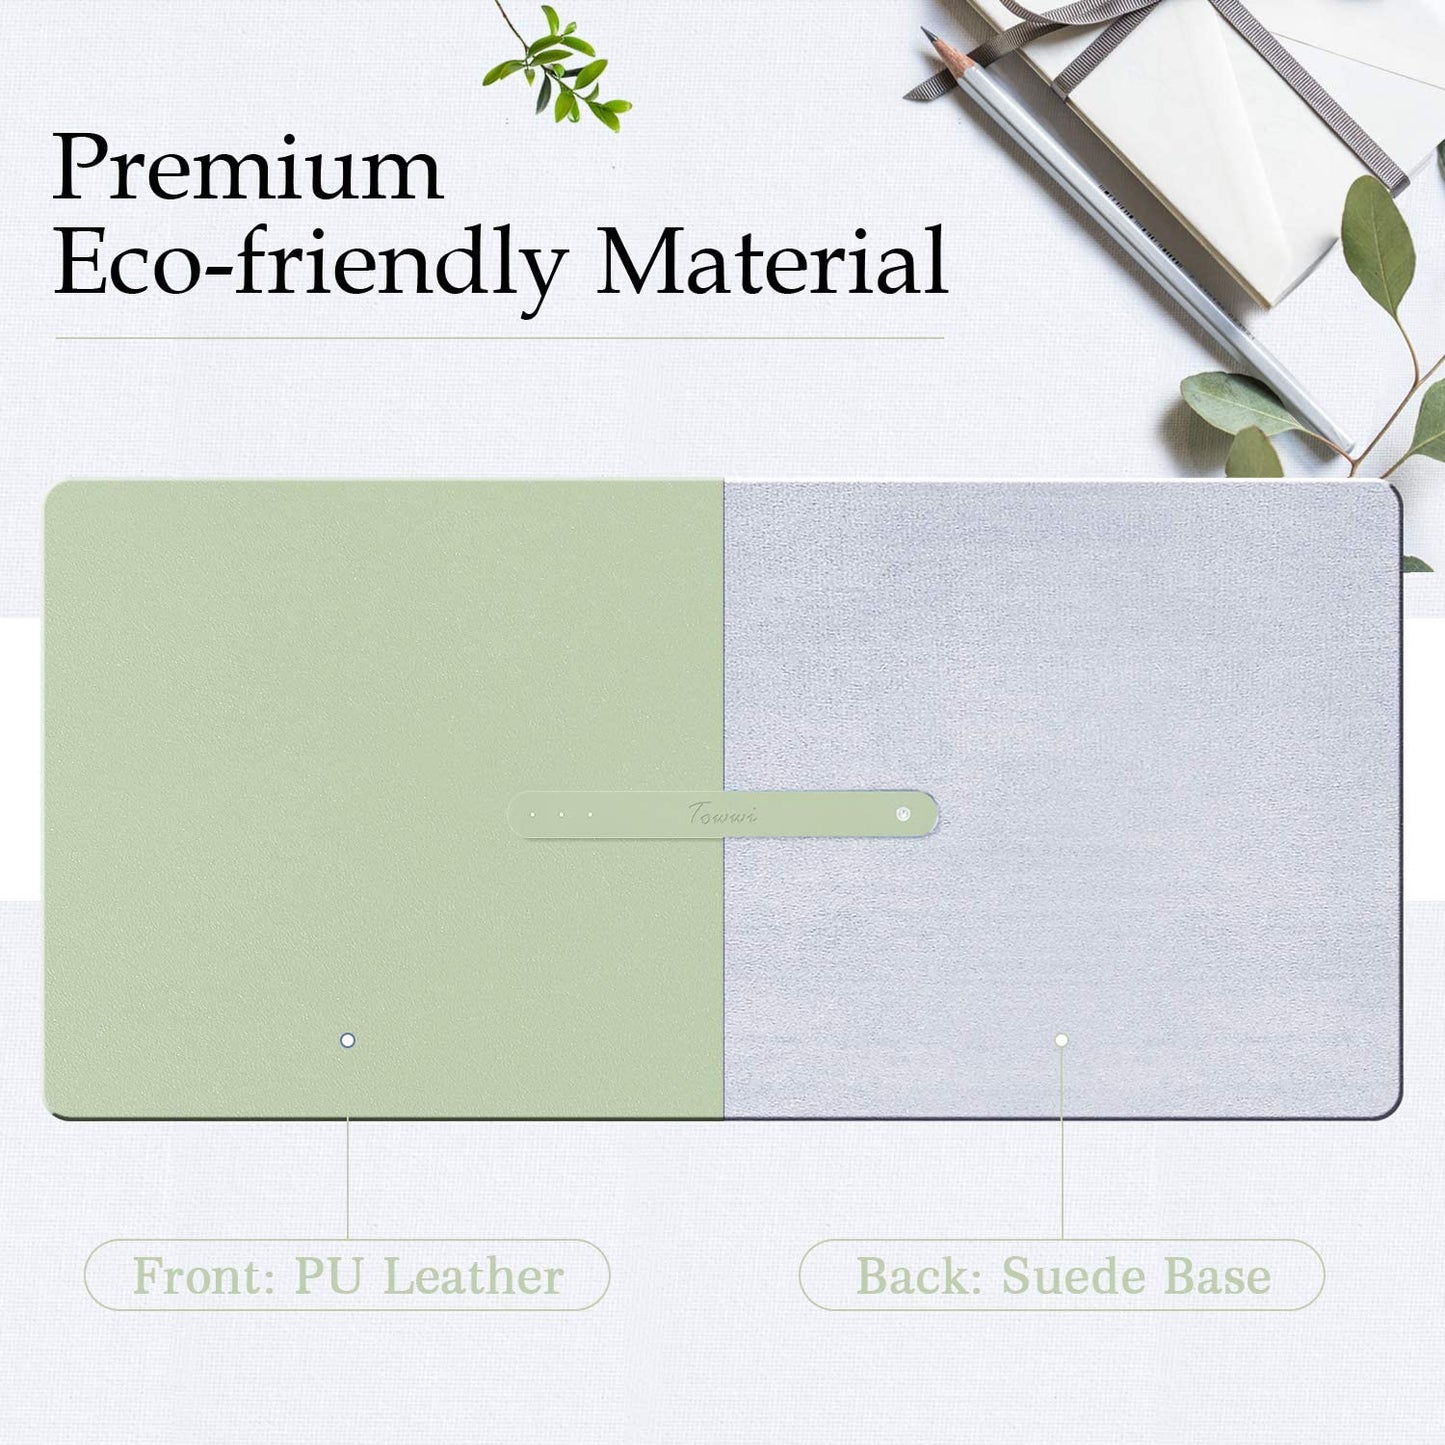 PU Leather Desk Pad with Suede Base, Multi-Color Non-Slip Mouse Pad, 32” X 16” Waterproof Desk Writing Mat, Large Desk Blotter Protector (Light Green)